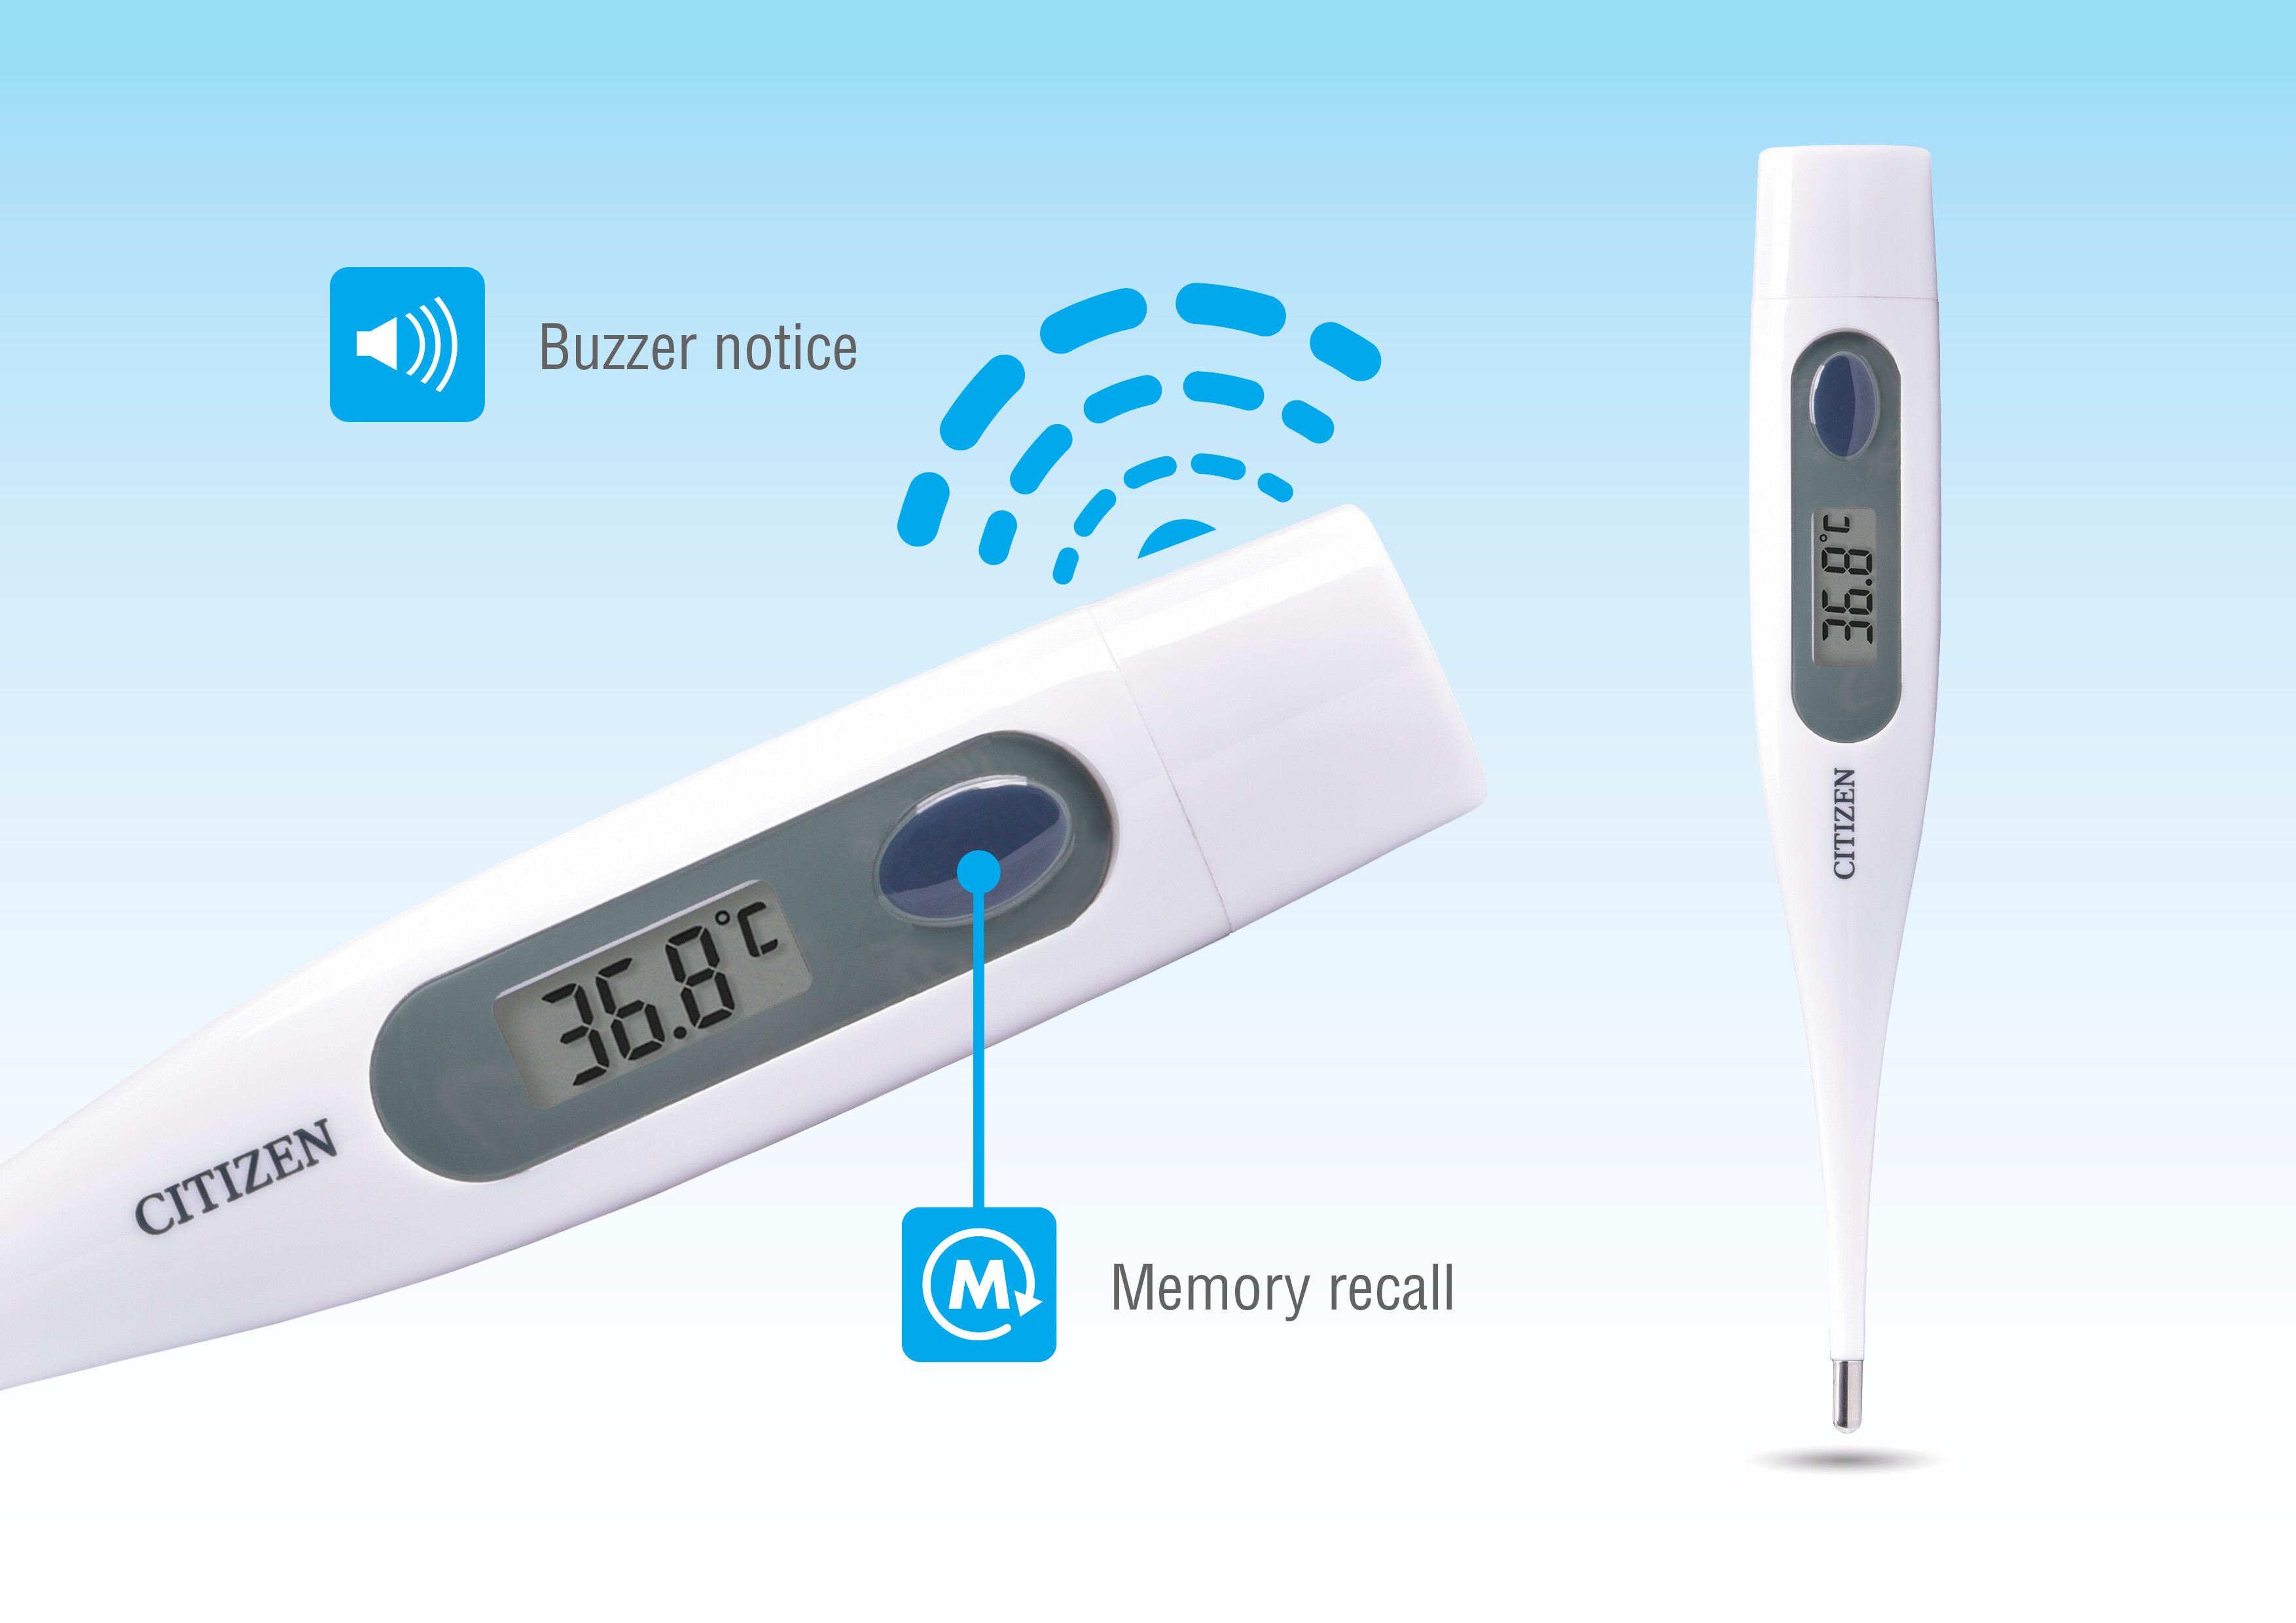 https://www.citizen-systems.com/media/images/healthcare/thermometer/CTA-303/Citizen_CTA-303_Thermometer_Alarm.jpg